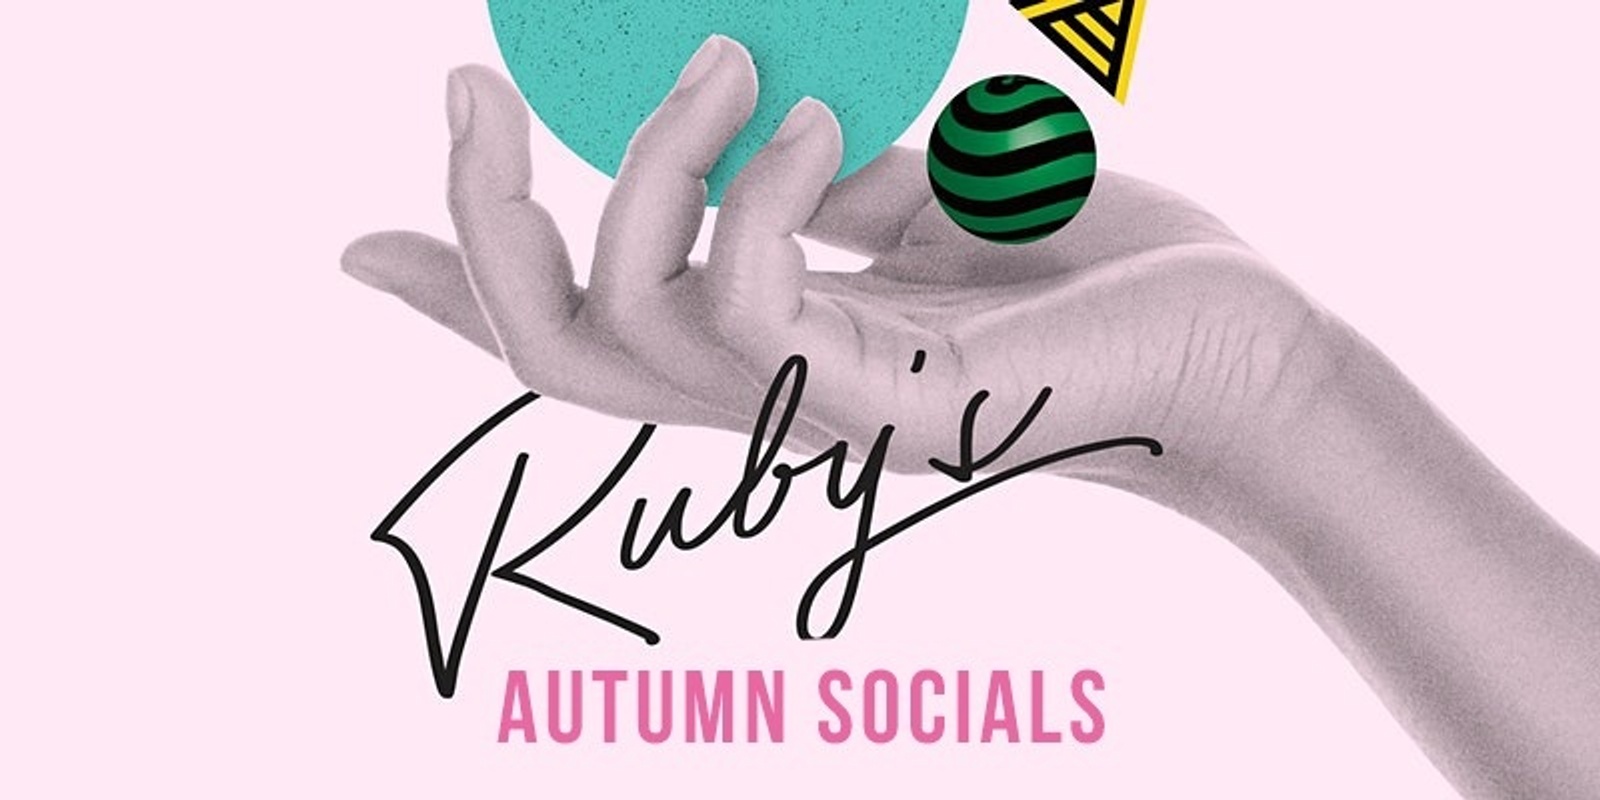 Banner image for Ruby's Autumn Socials: Kate Wadey Trio